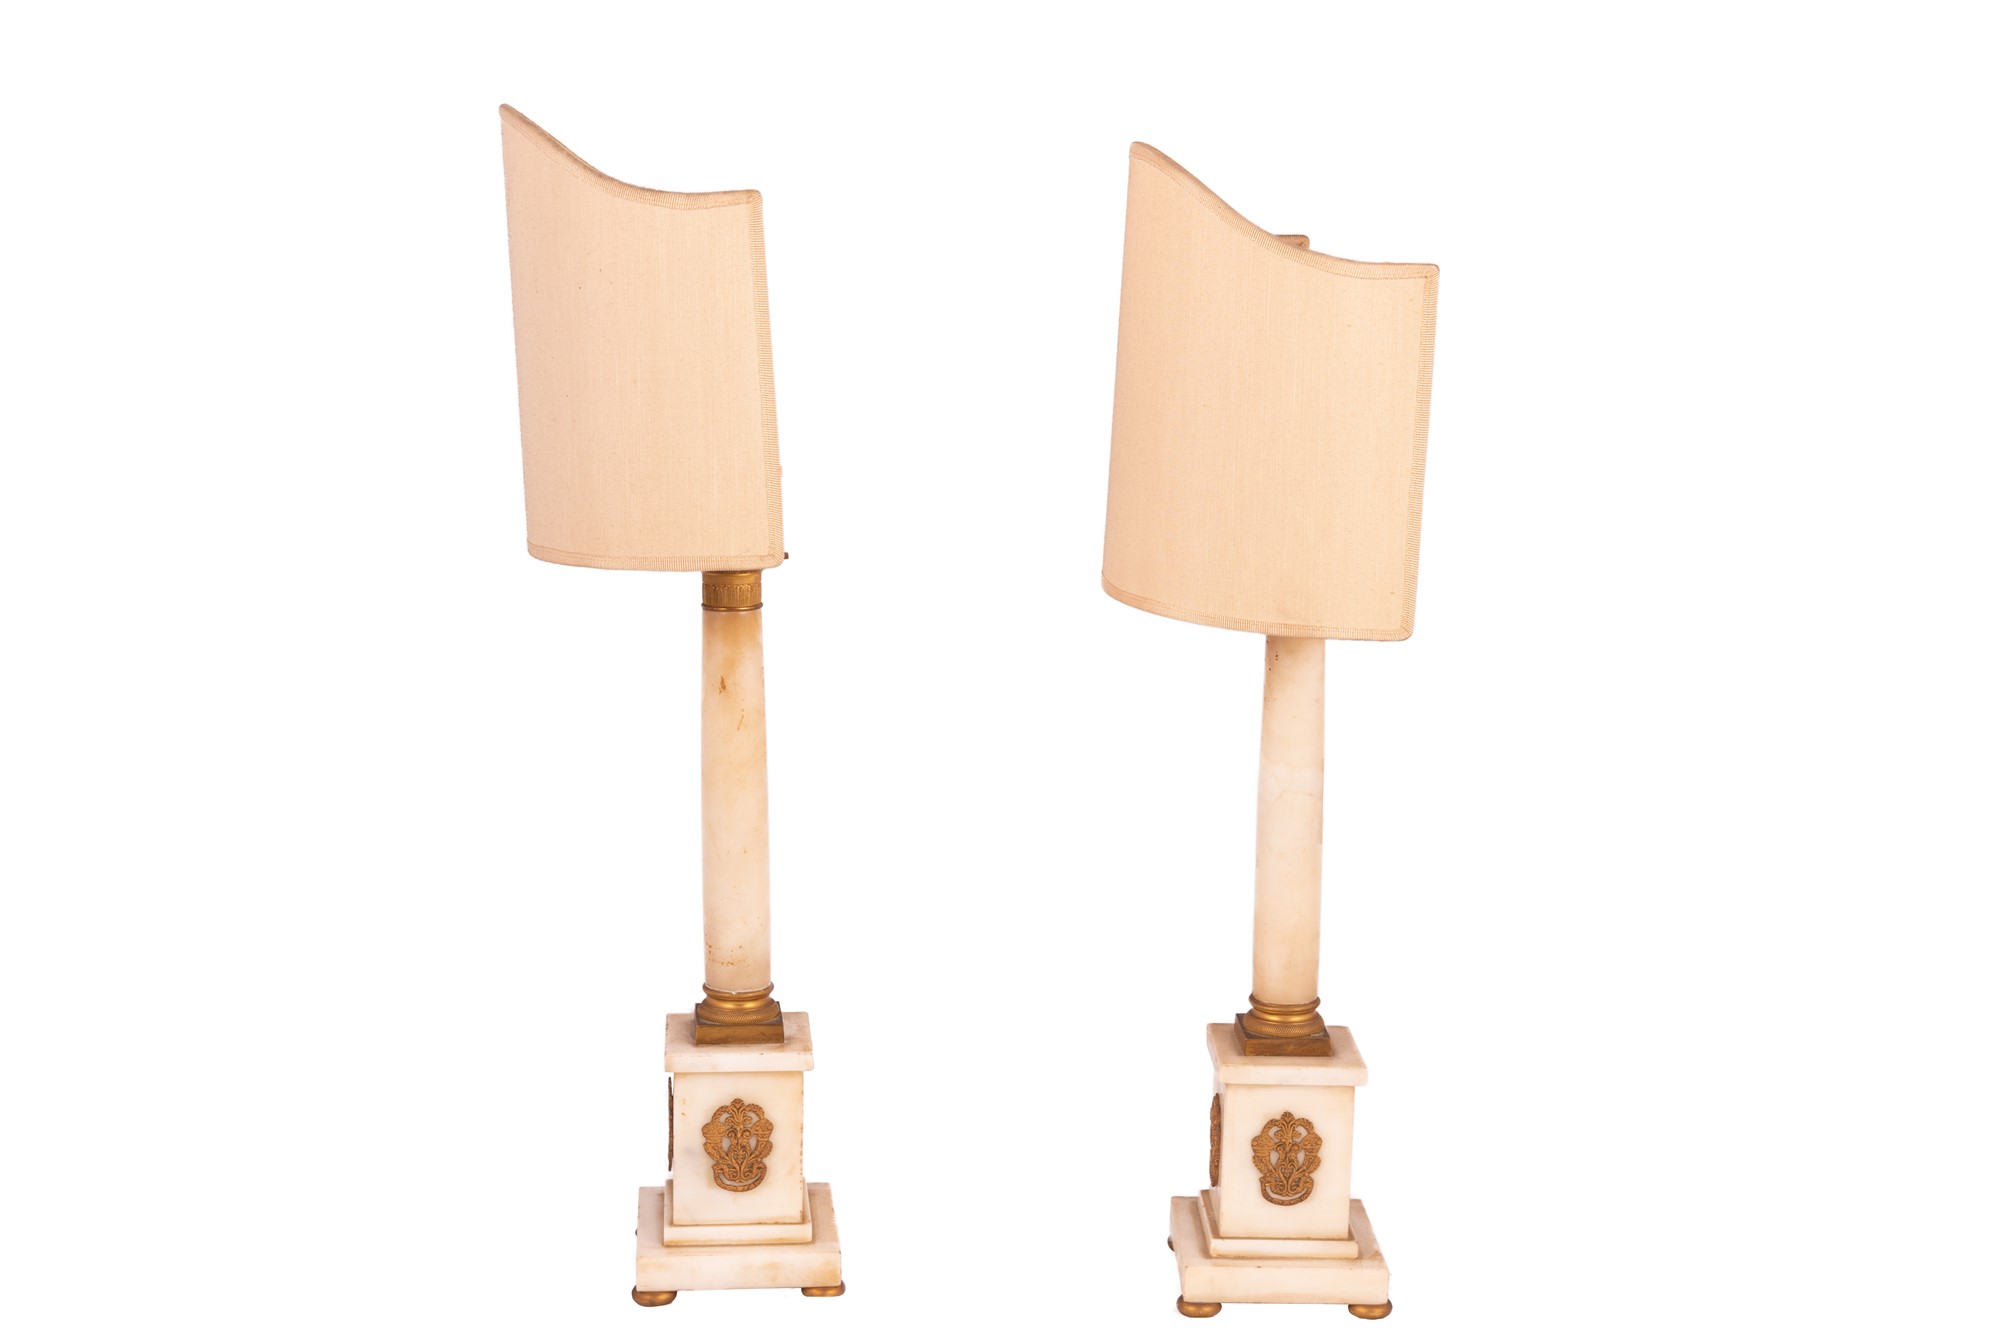  2 table lamps in column  - Image 2 of 3